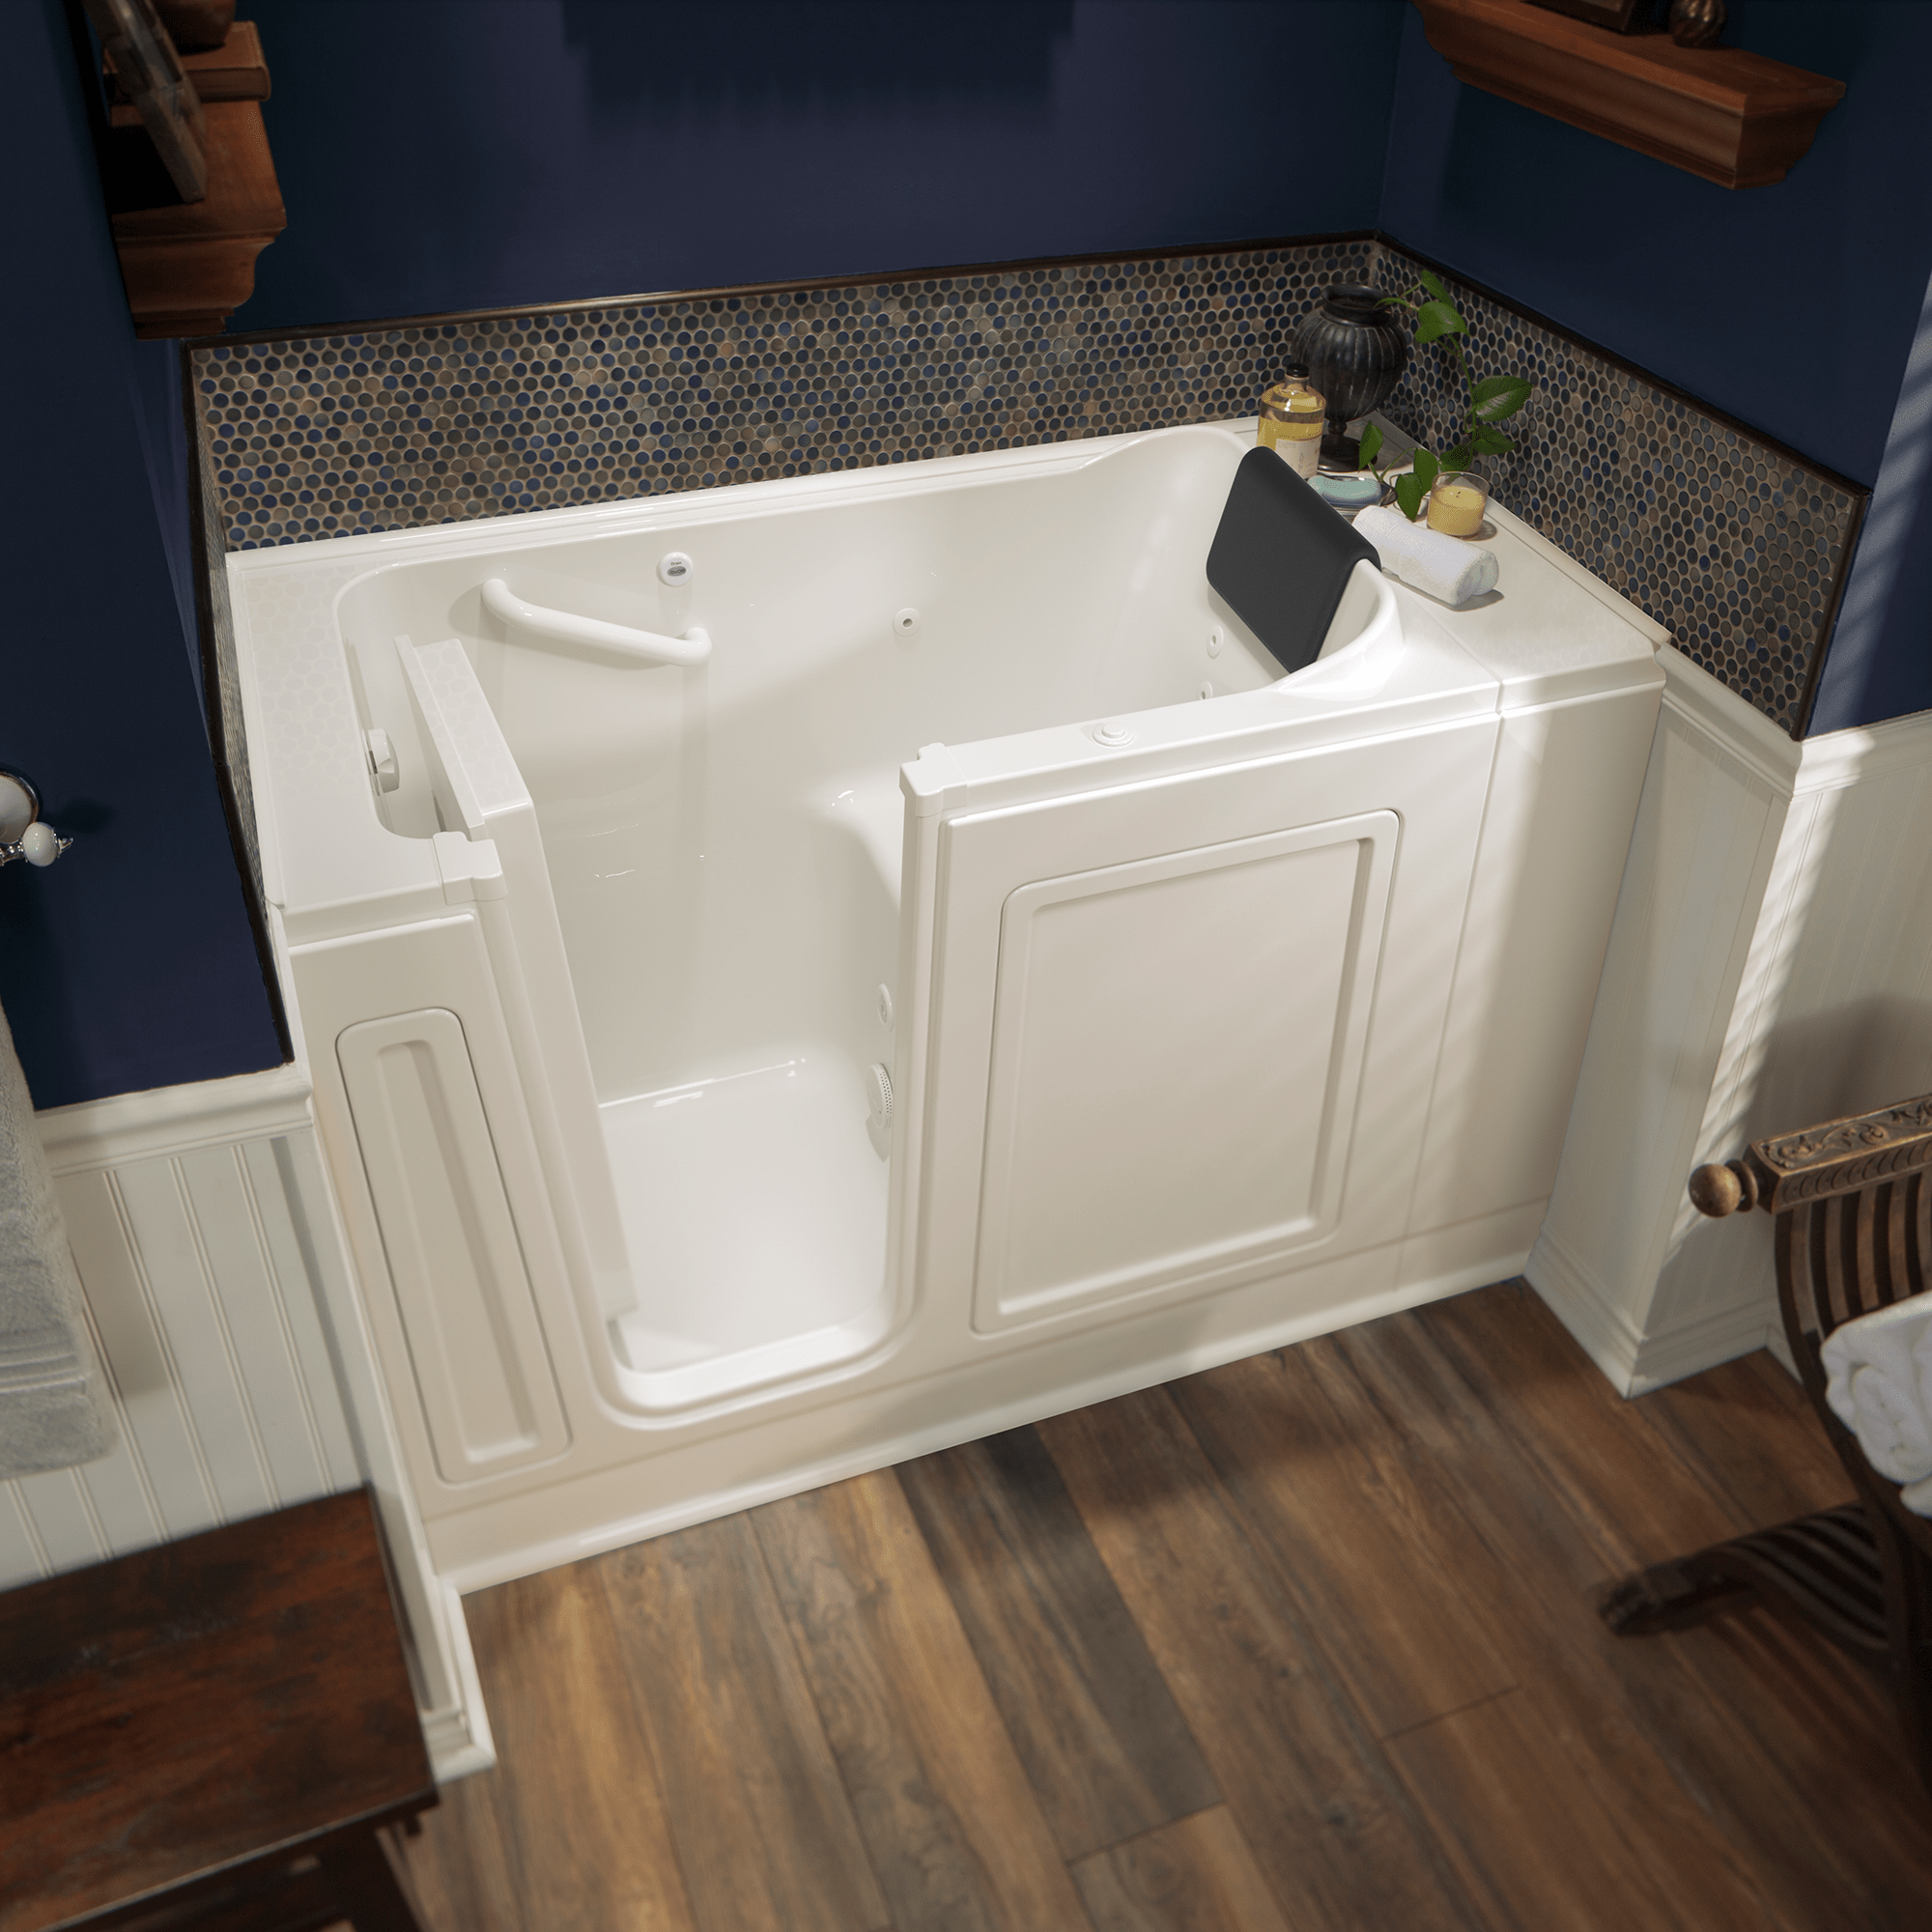 Acrylic Luxury Series 28 x 48 Inch Walk in Tub With Whirlpool System   Left Hand Drain WIB LINEN